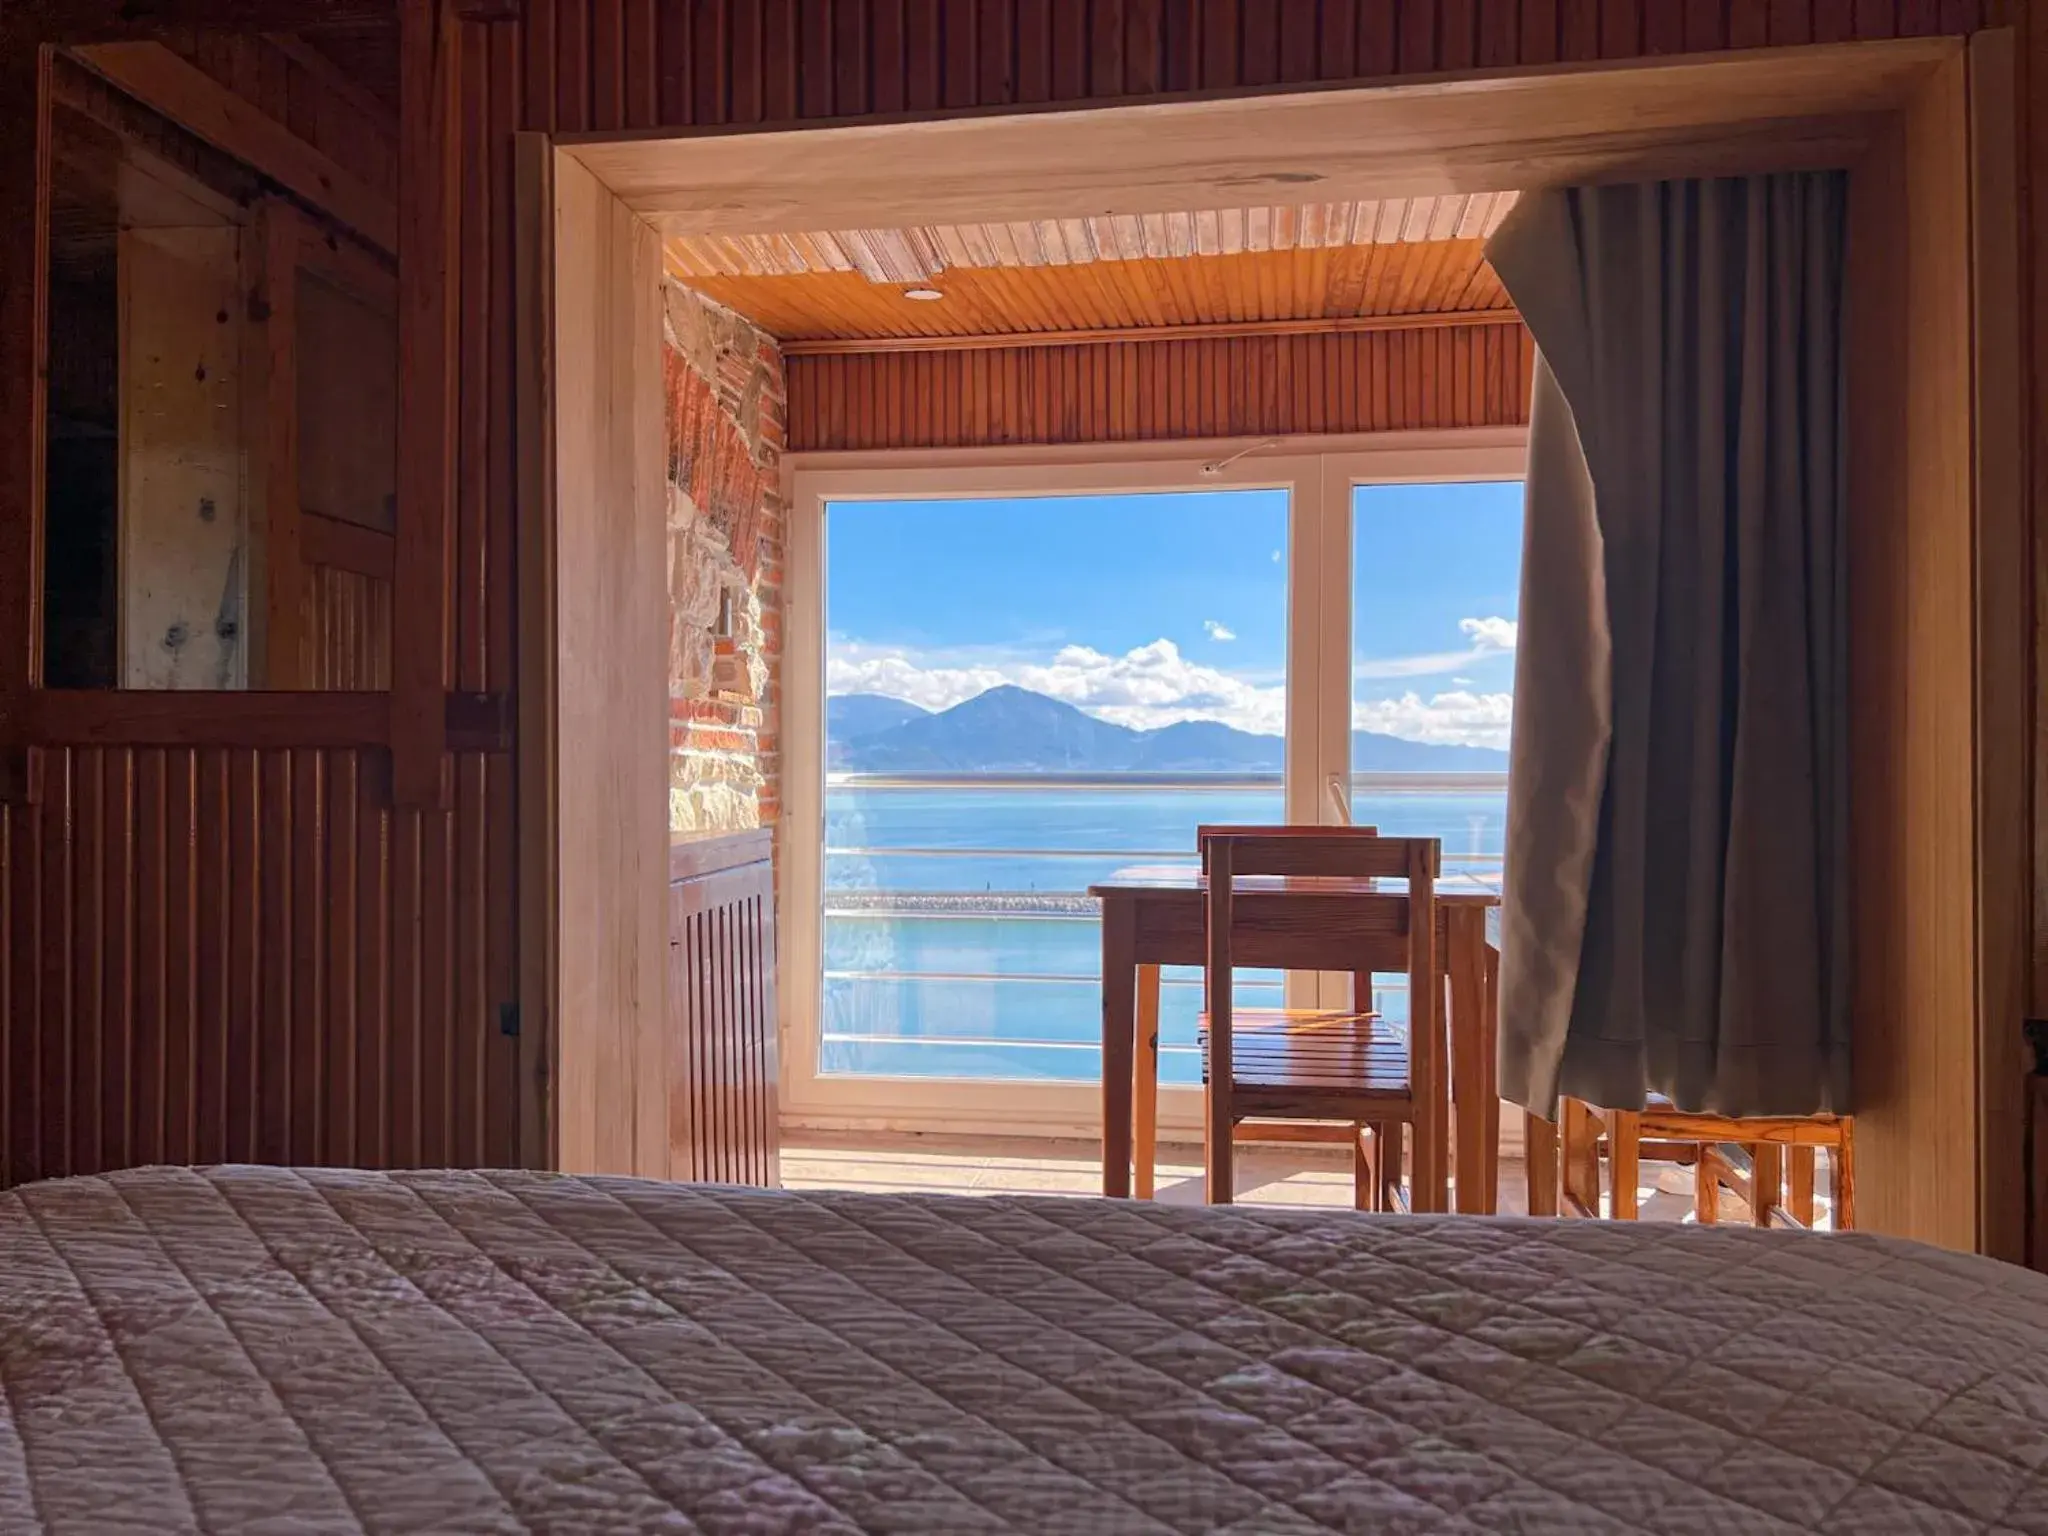 Bed, Mountain View in Lale Pension                                                                                